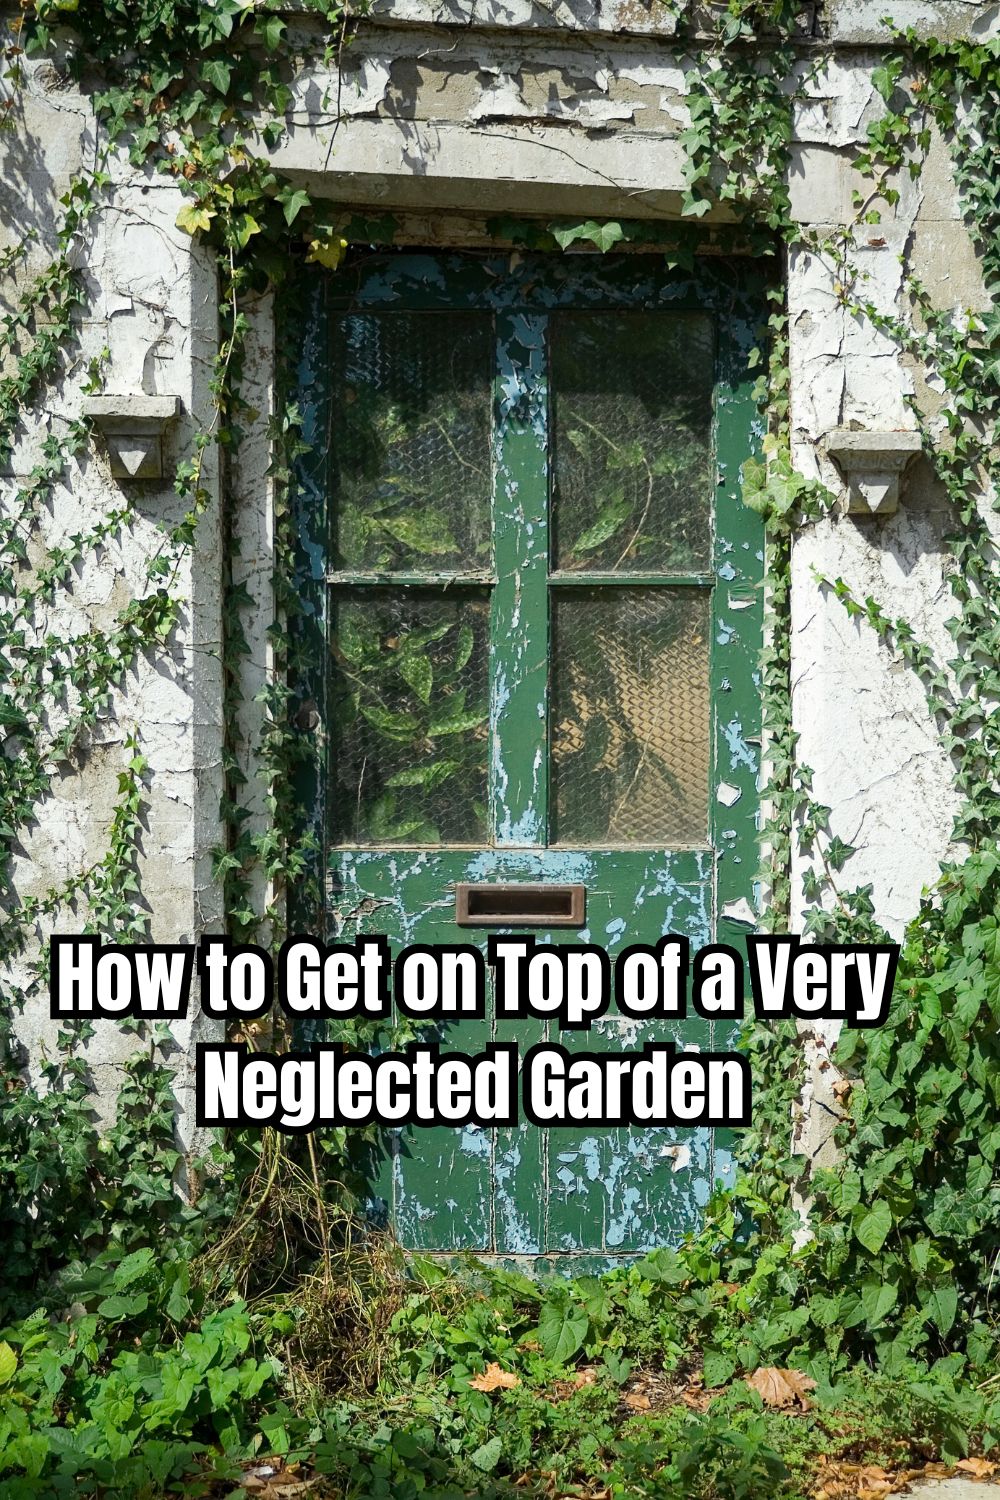 How to Get on Top of a Very Neglected Garden